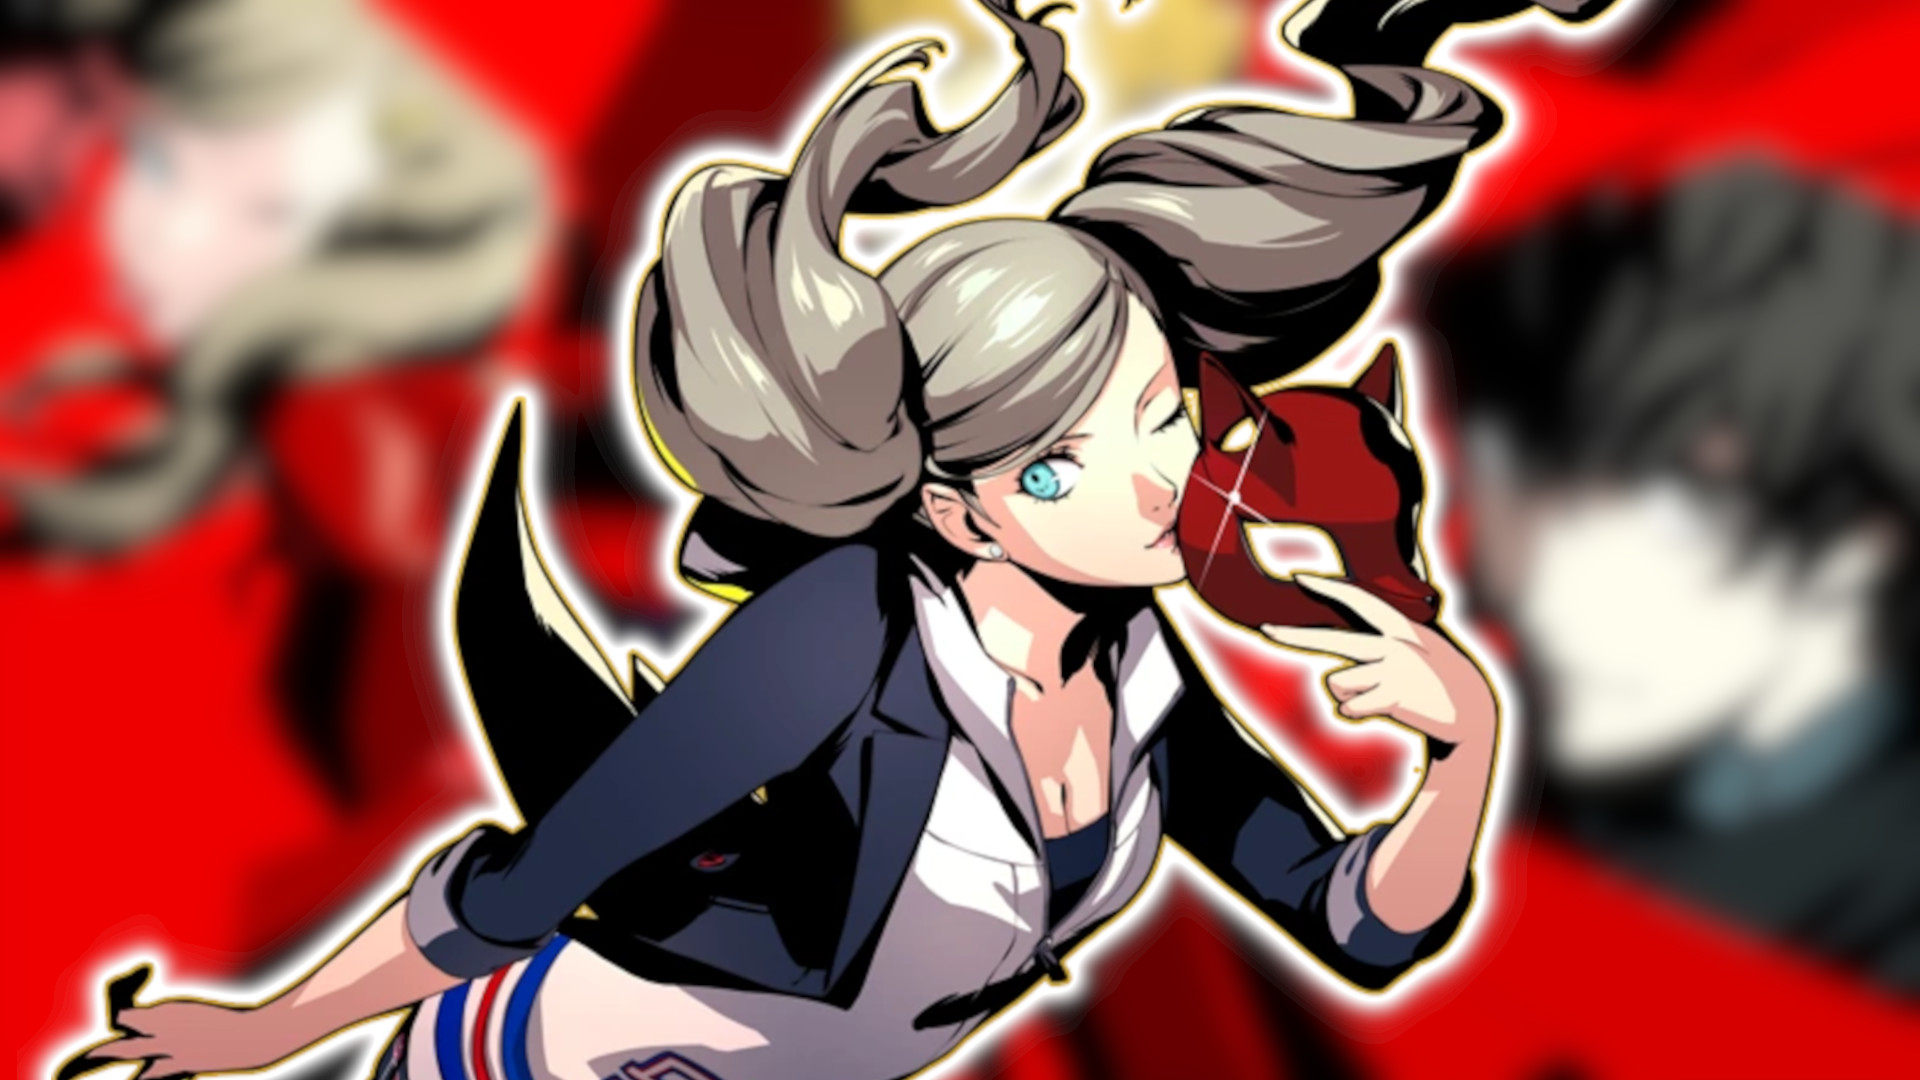 Persona 5 Ann's personality, skills, and more | Pocket Tactics